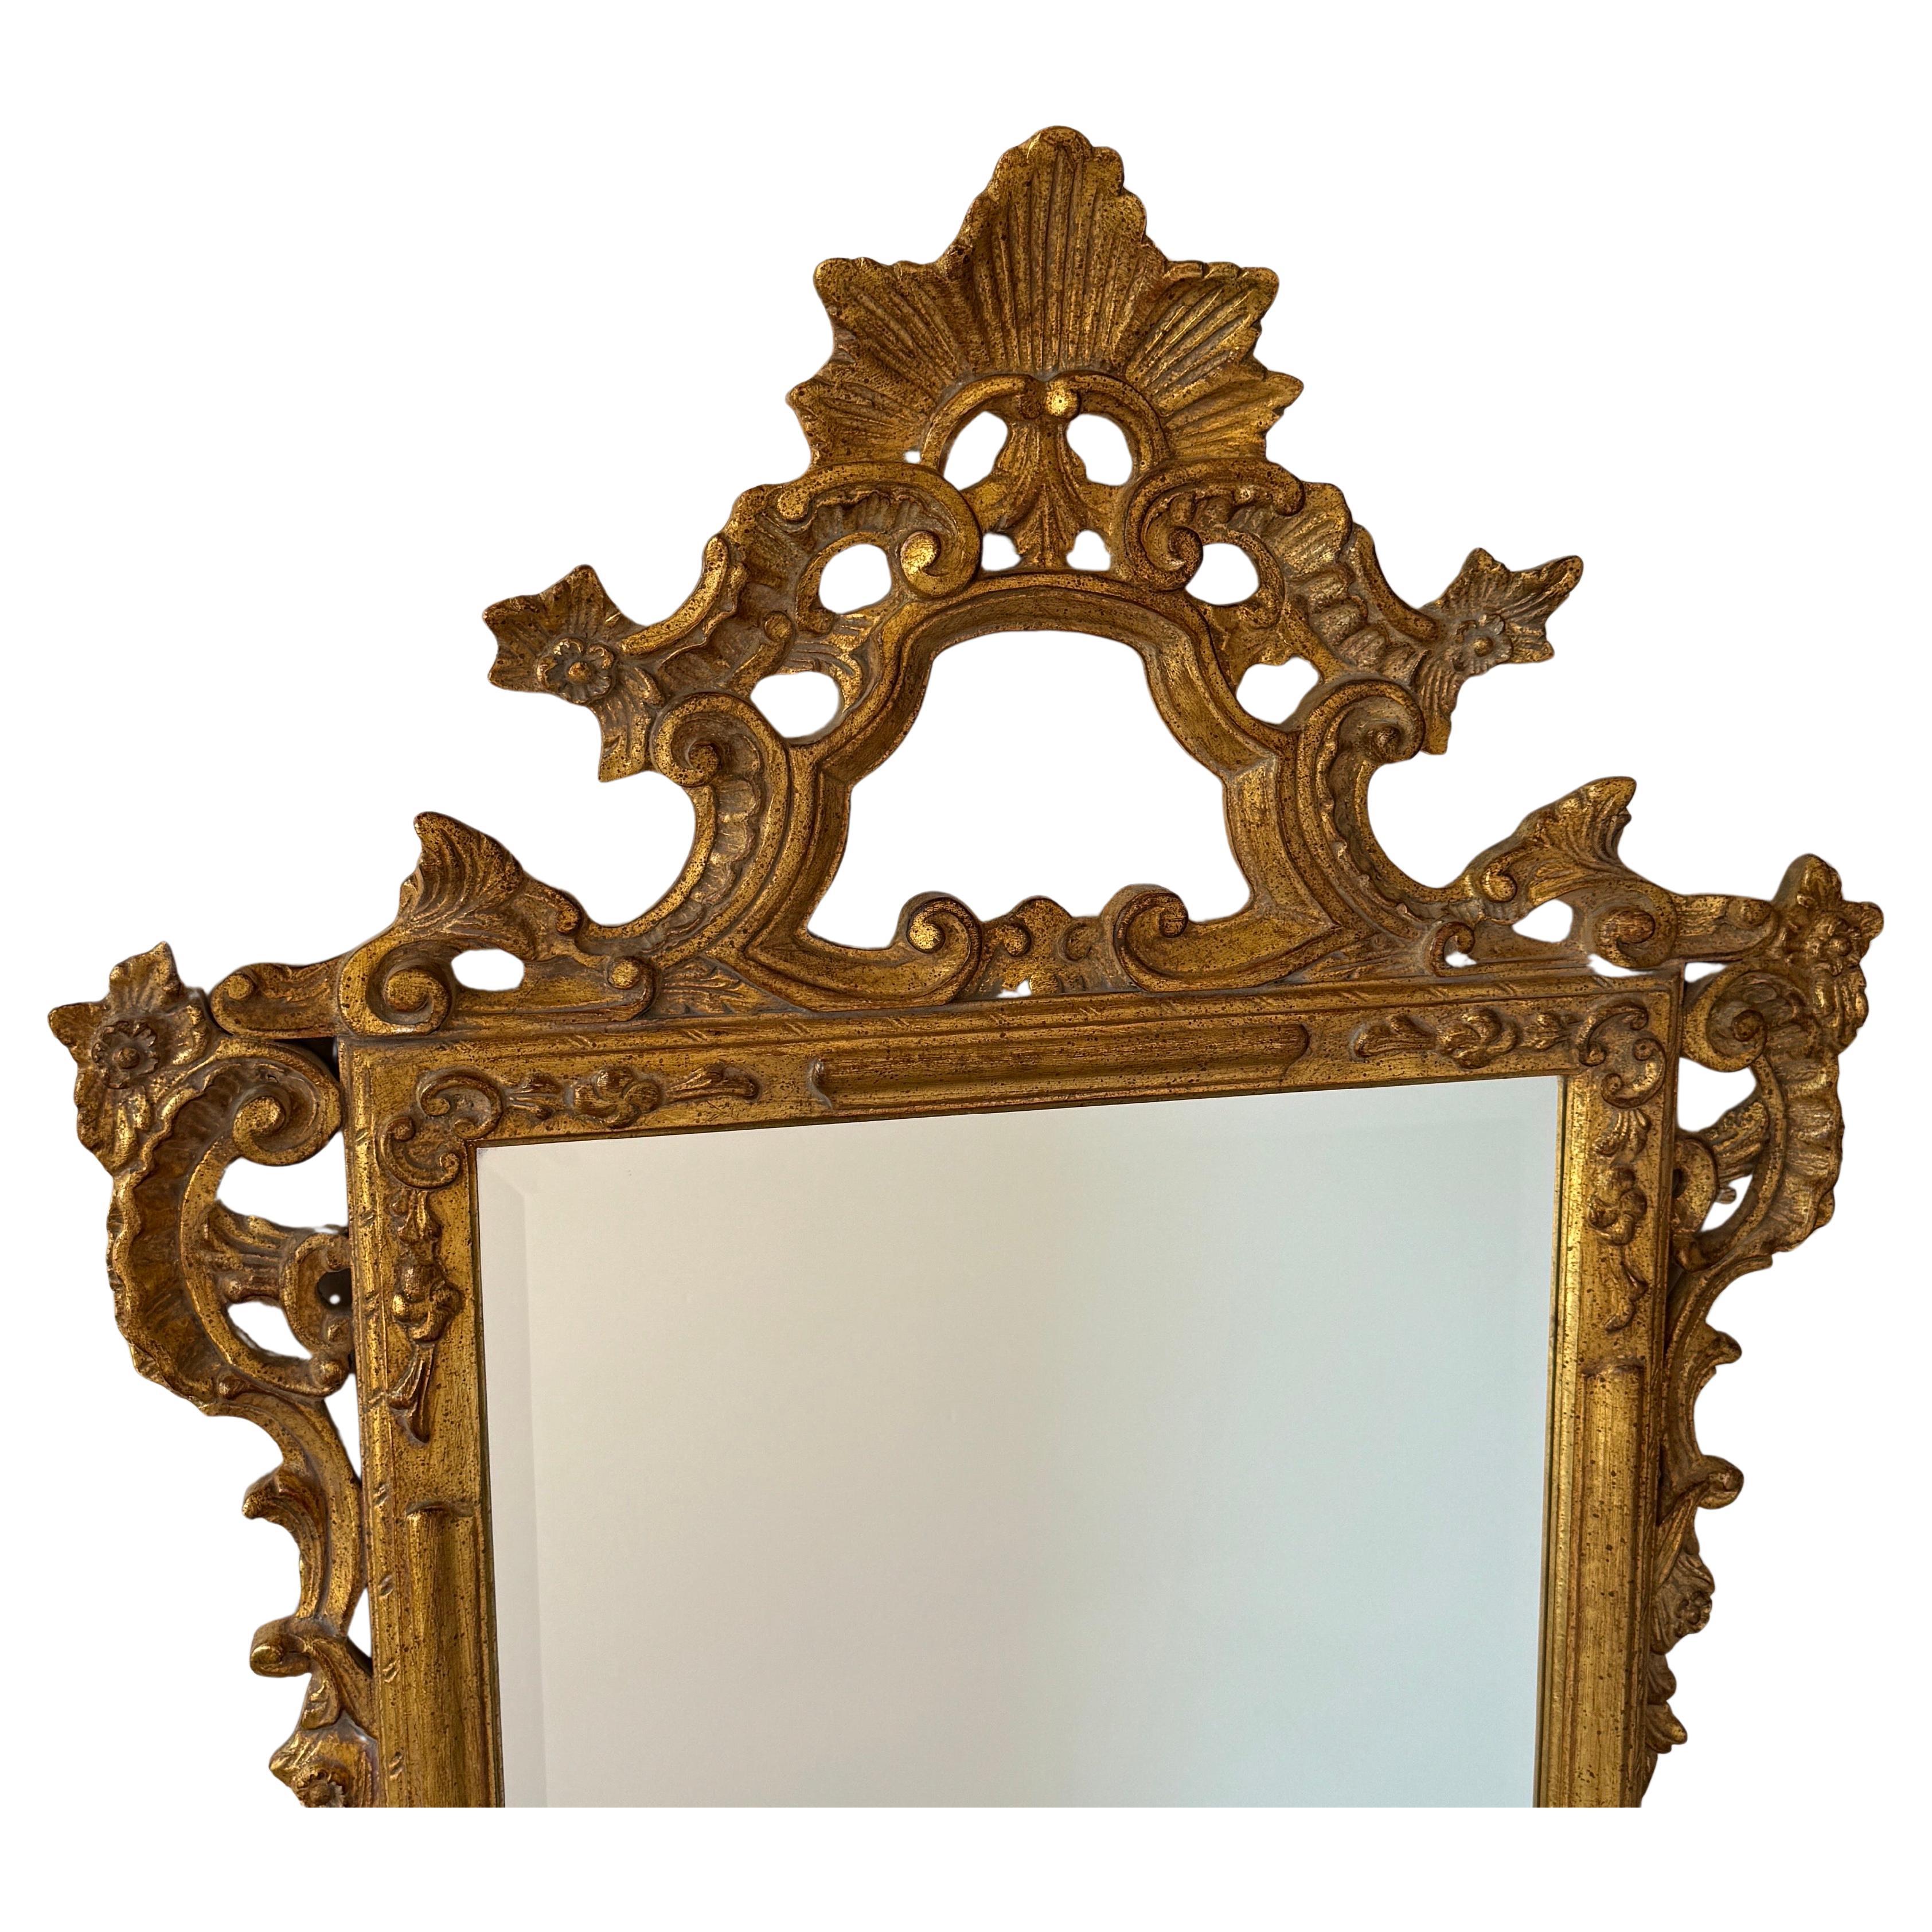 Large Louis XV Gilded Wall Mirror, France

Decorate a powder room or entry with this elegant gilt mirror. Crafted in France and curved throughout, this wall mirror is decorated with a hand carved cartouche at the pediment featuring a center shell